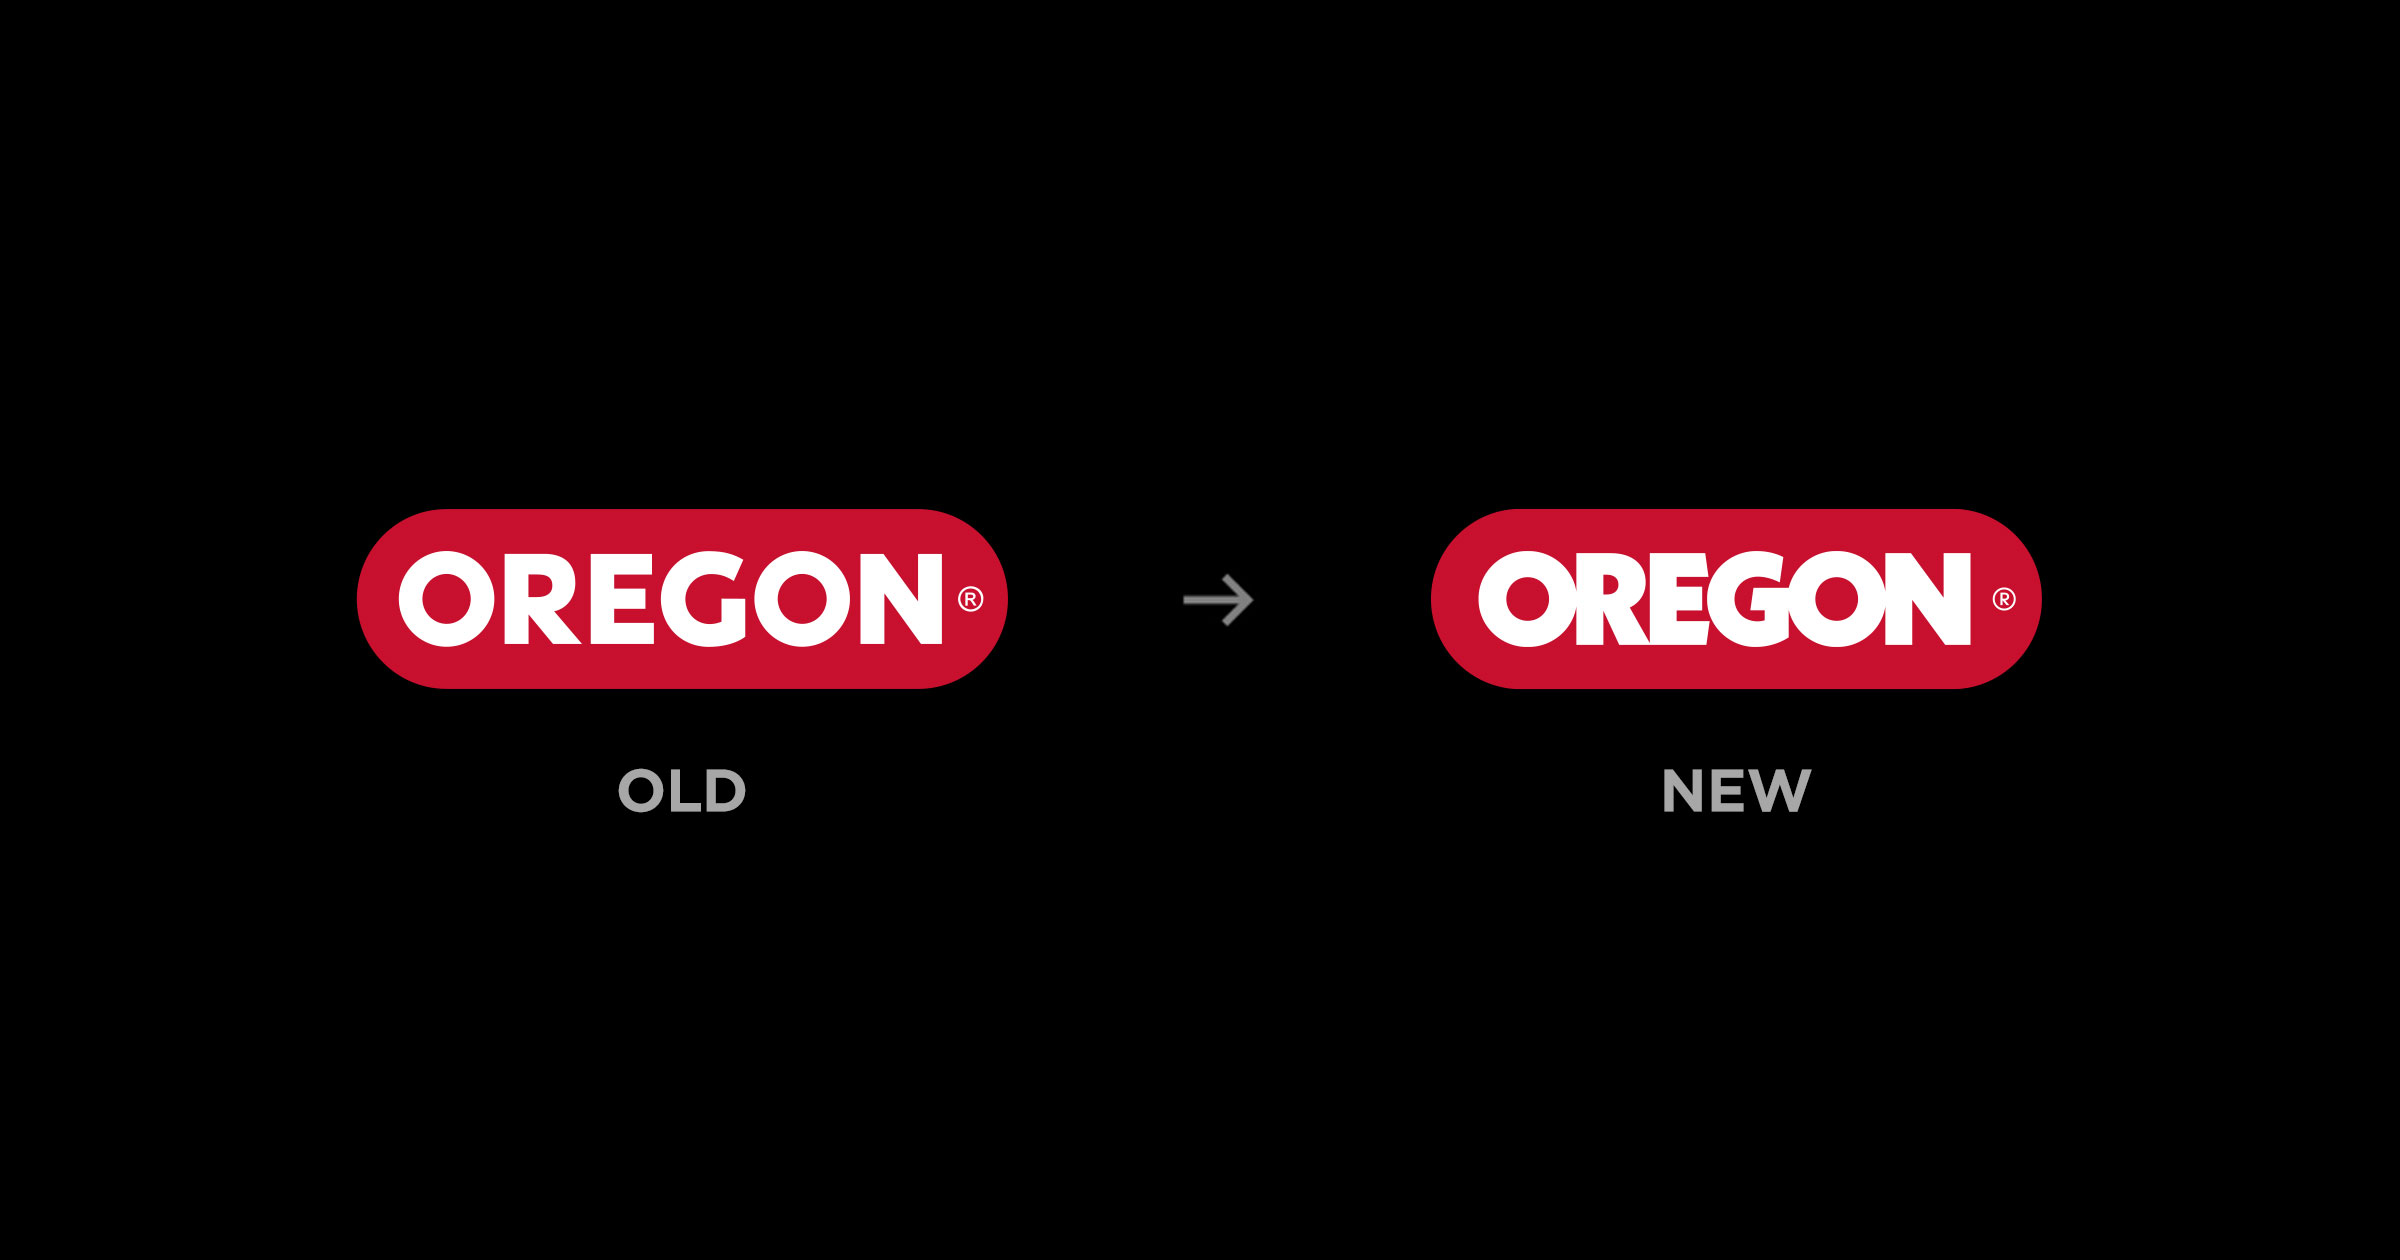 Side-by-side comparison of the old and new Oregon Tool logos.